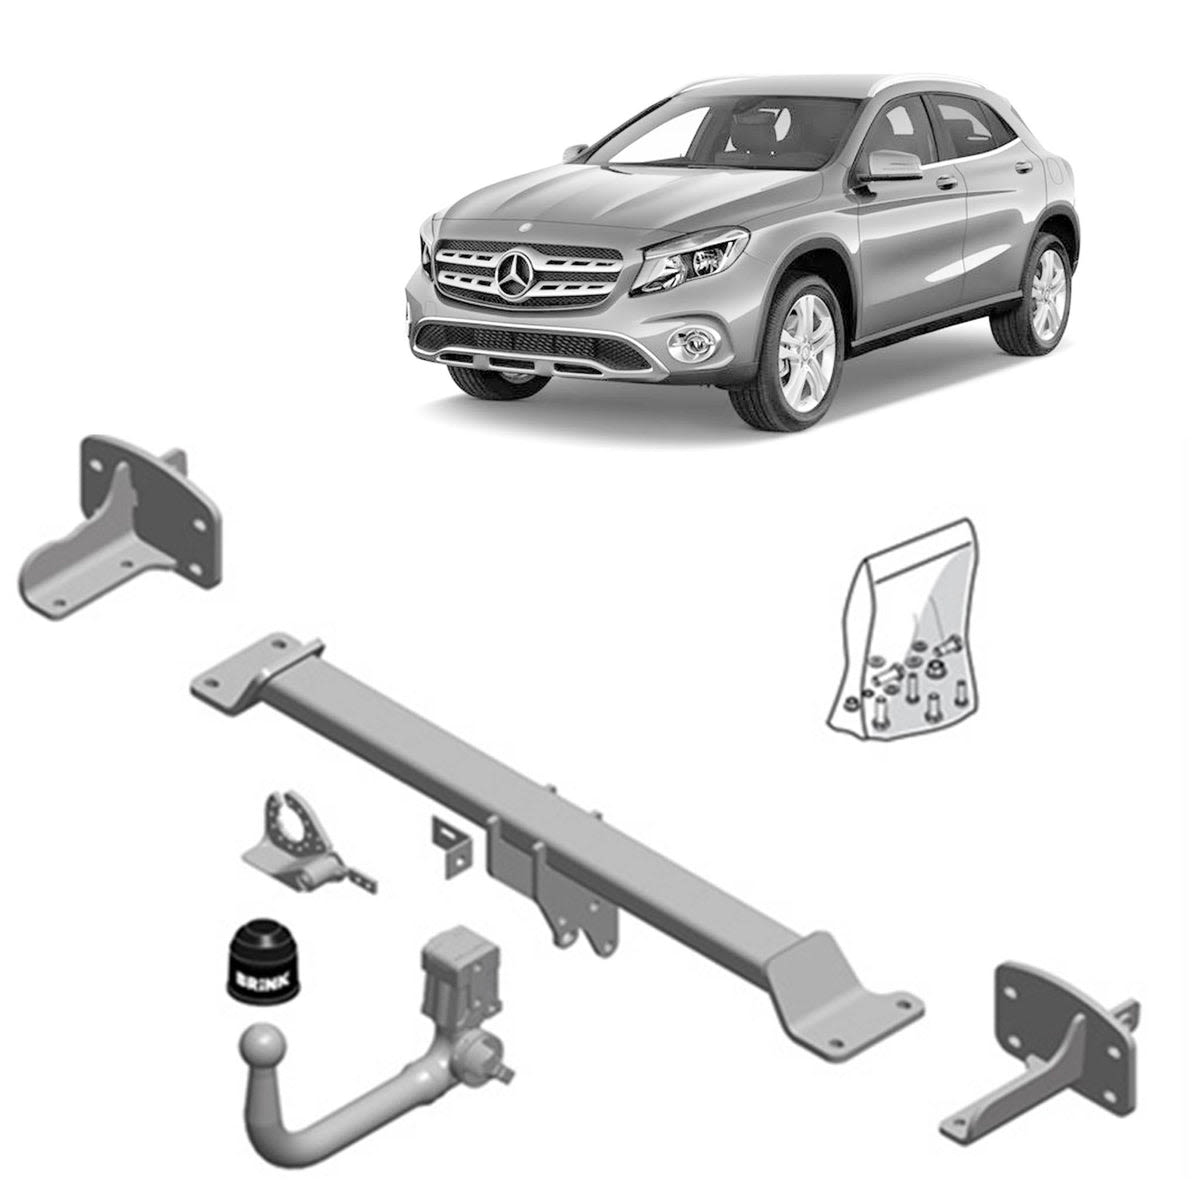 Brink Towbar for MERCEDES-BENZ GLA-CLASS (04/2014 - on)